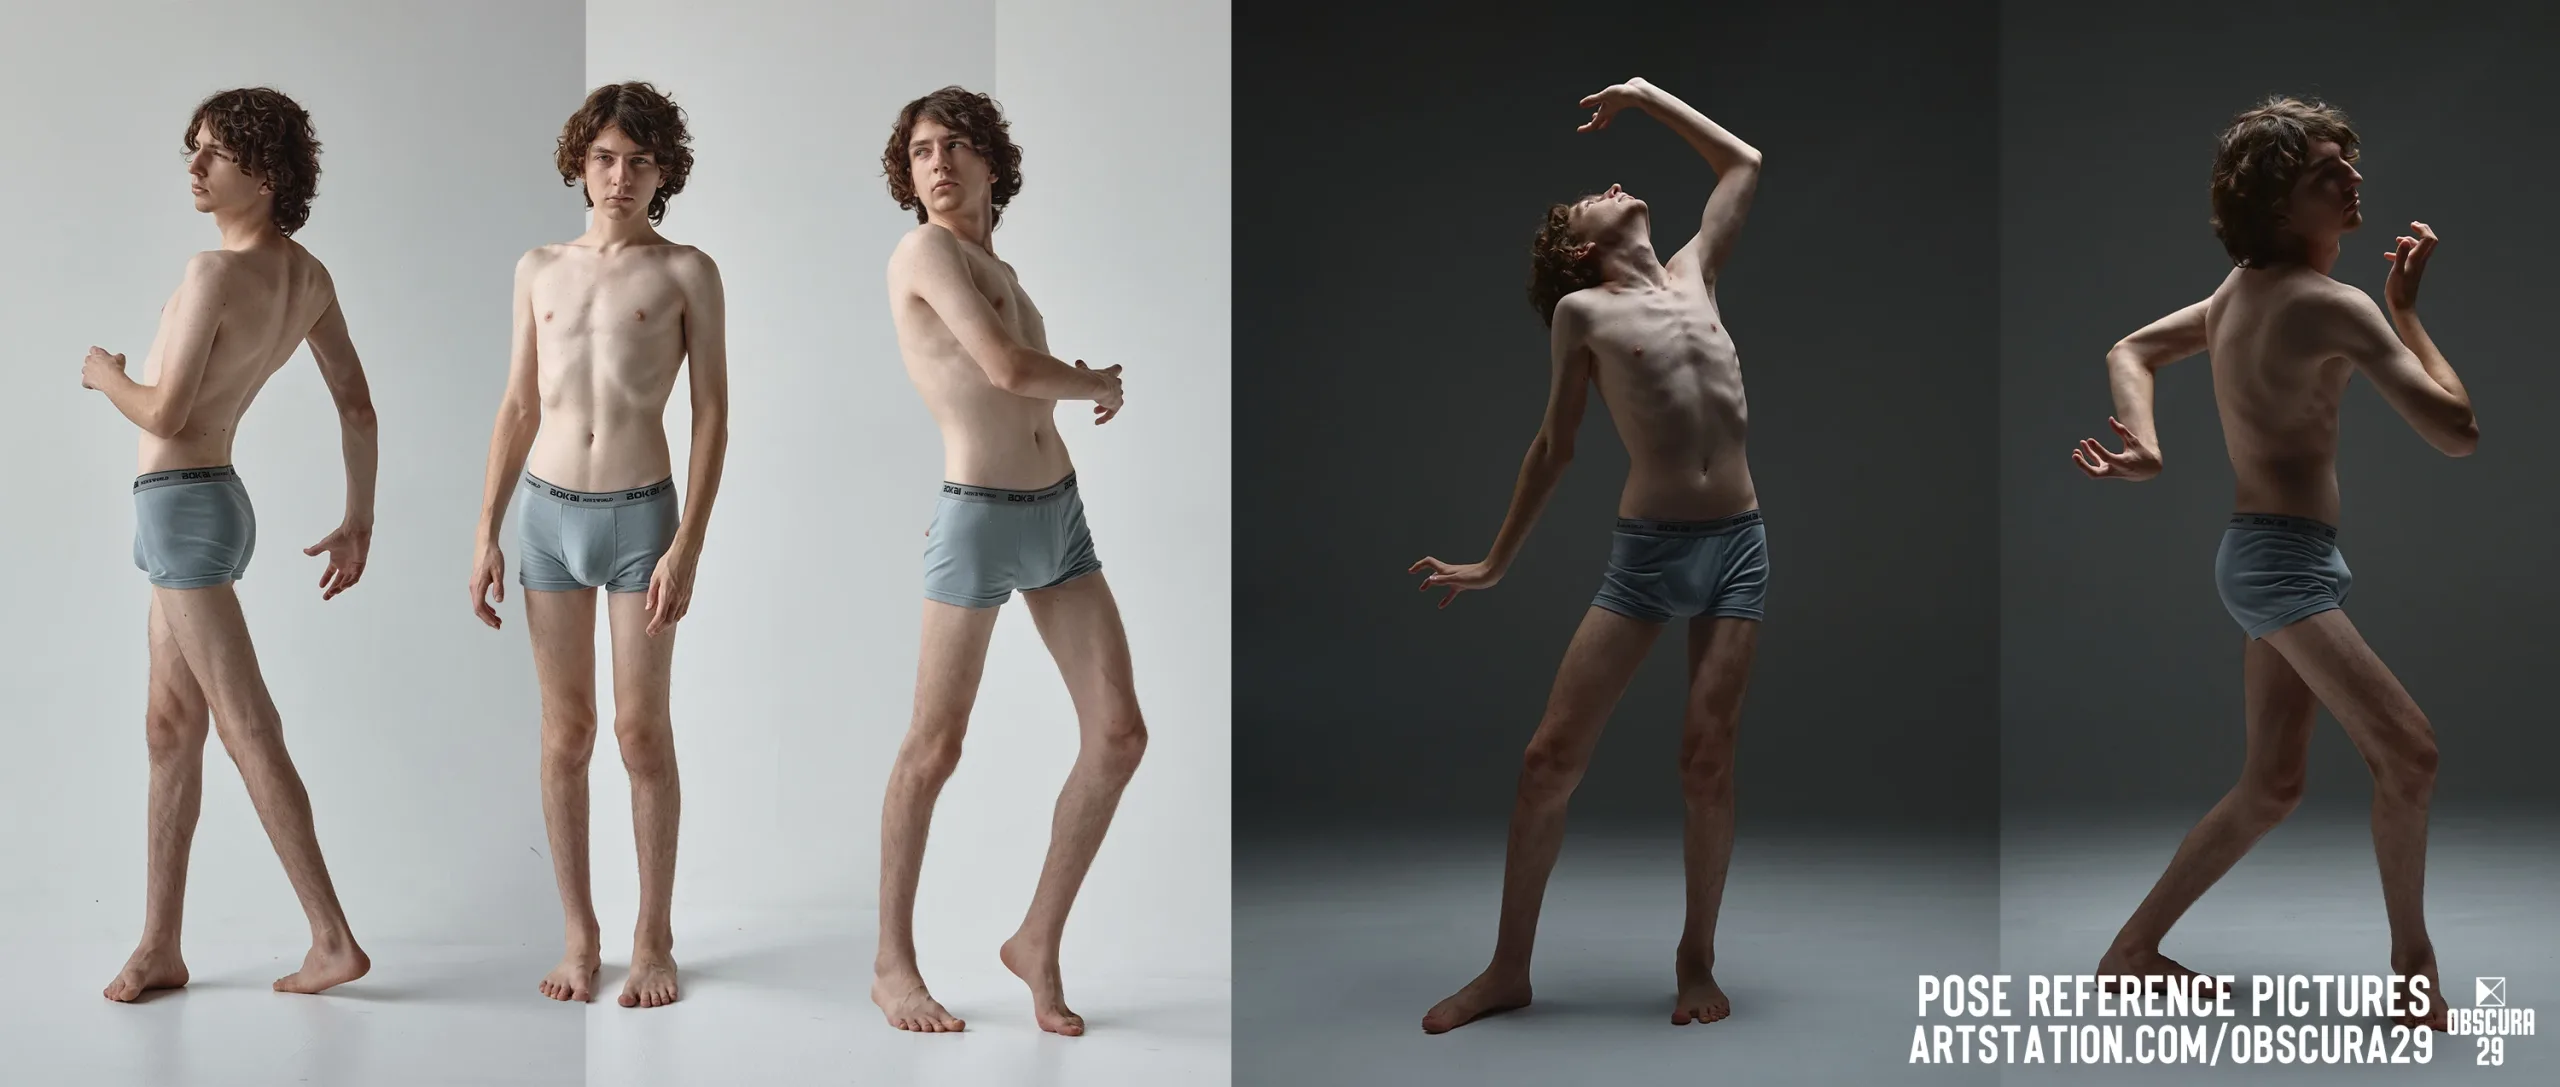 920 Expressive Male Poses Reference Pictures